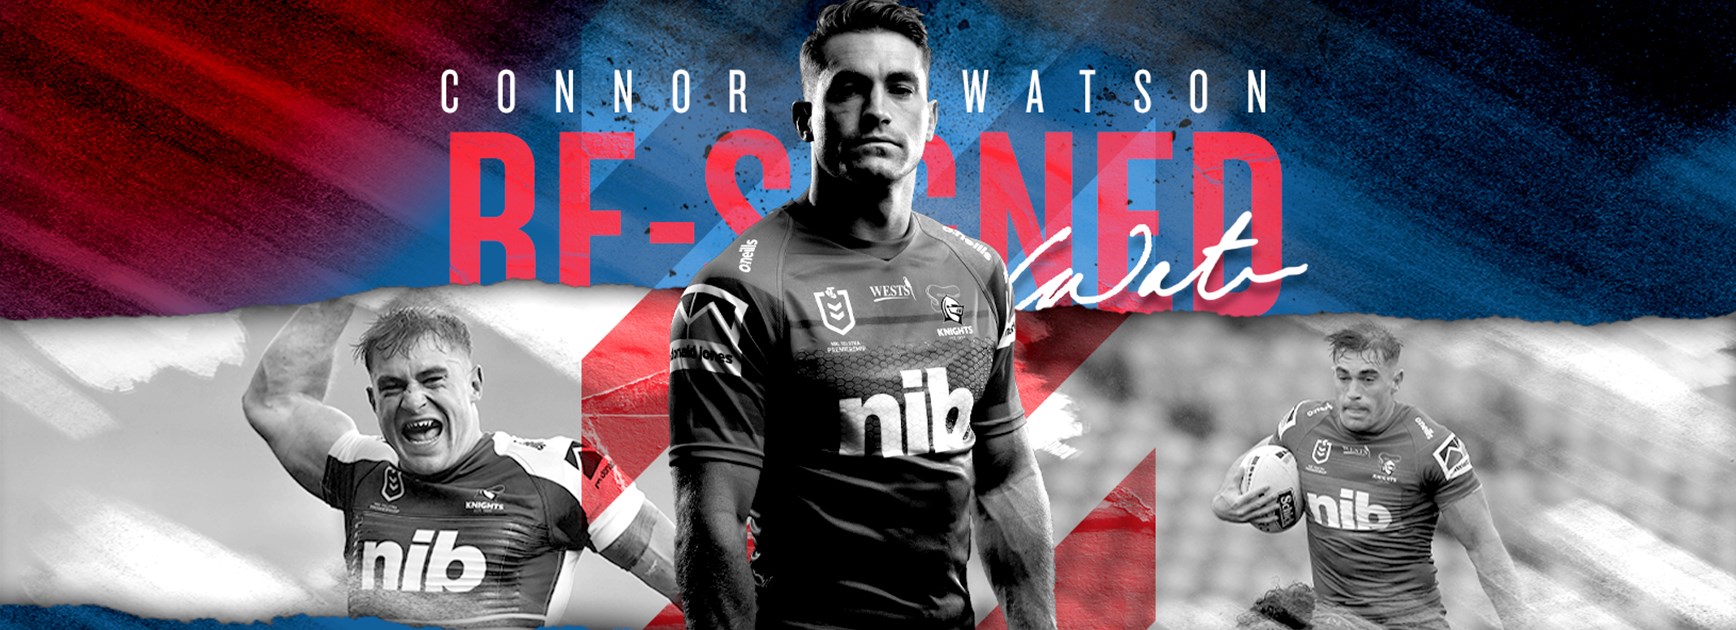 Connor Watson re-signs with the Knights